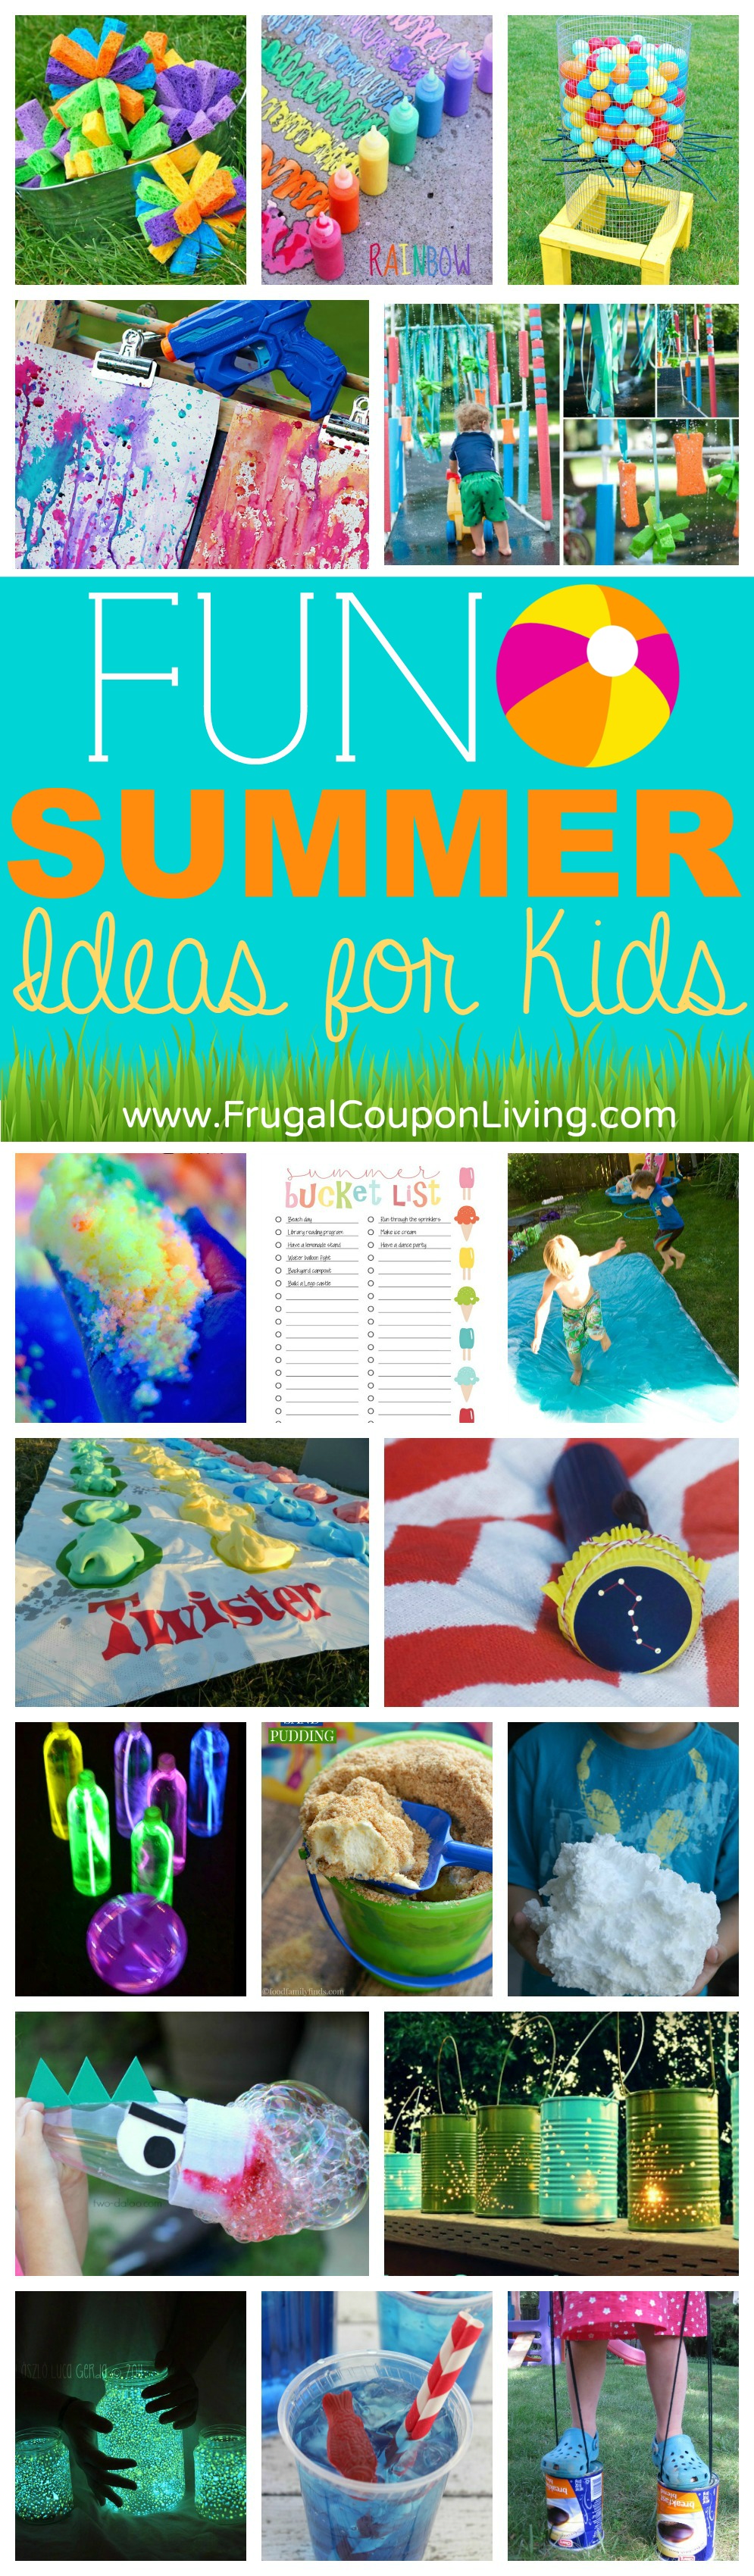 diy-summer-fun-ideas-for-kids-frugal-coupon-living